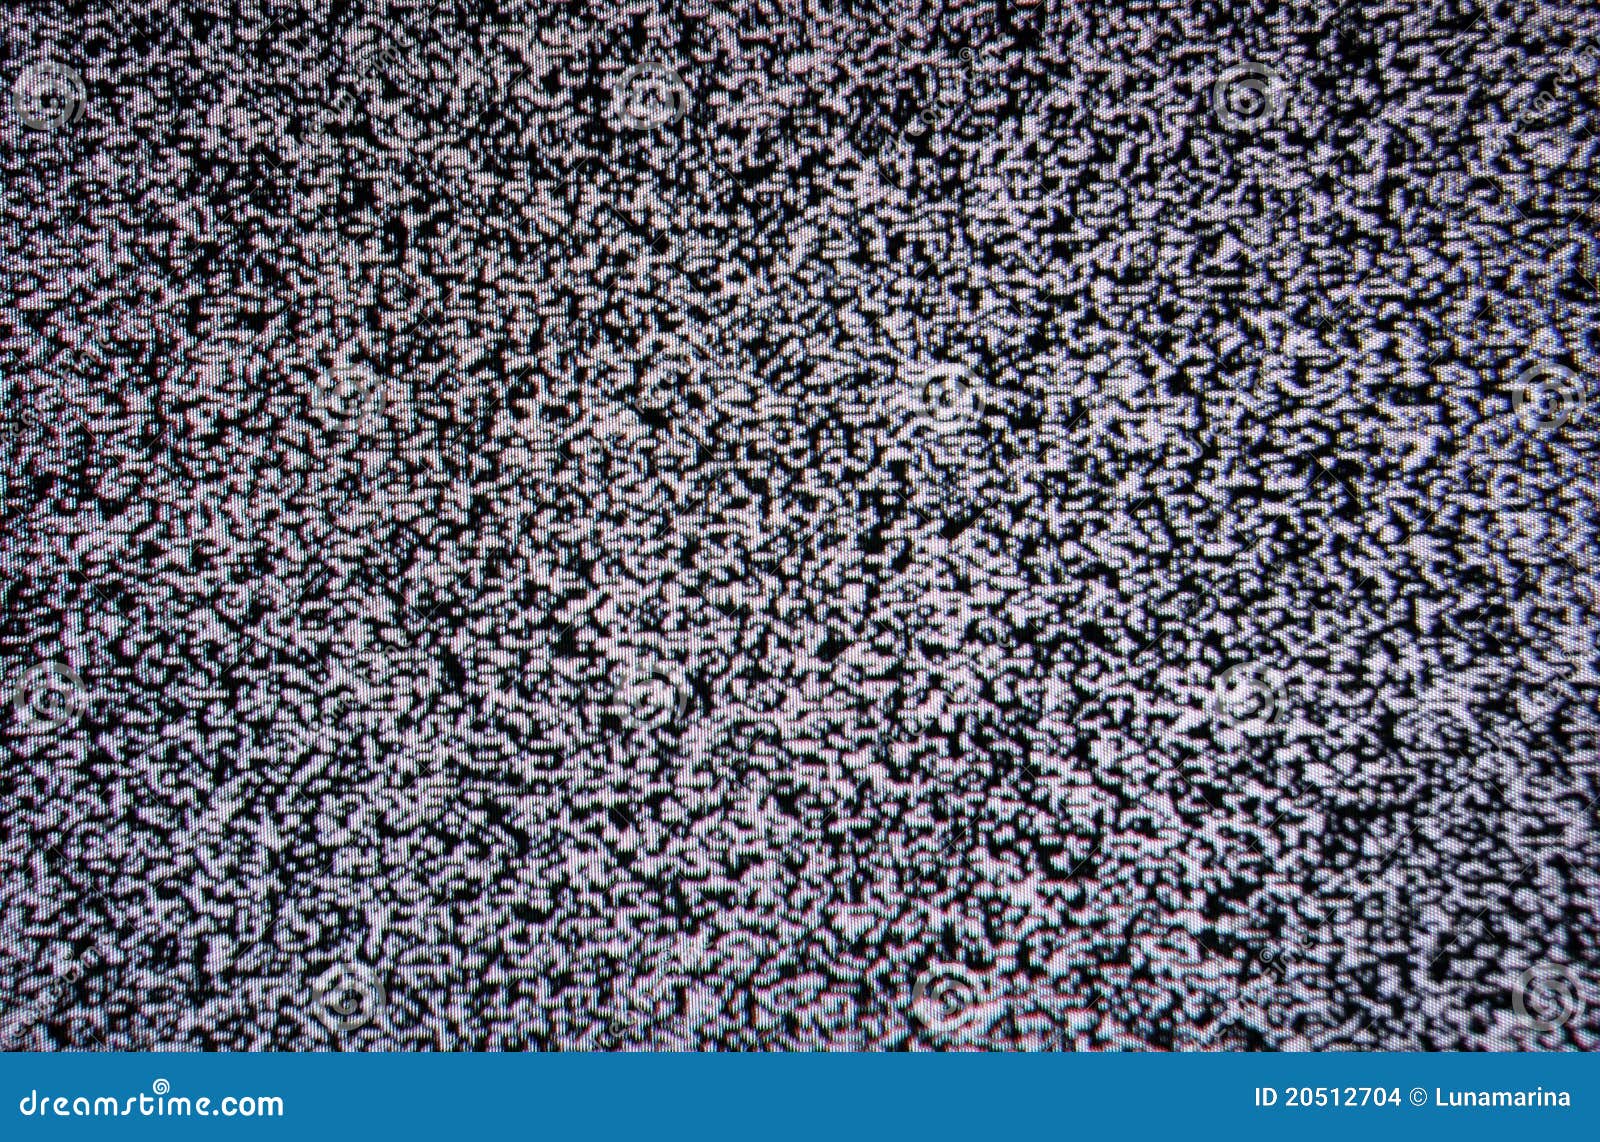 Black And White TV Screen Noise Stock Photo - Image: 20512704